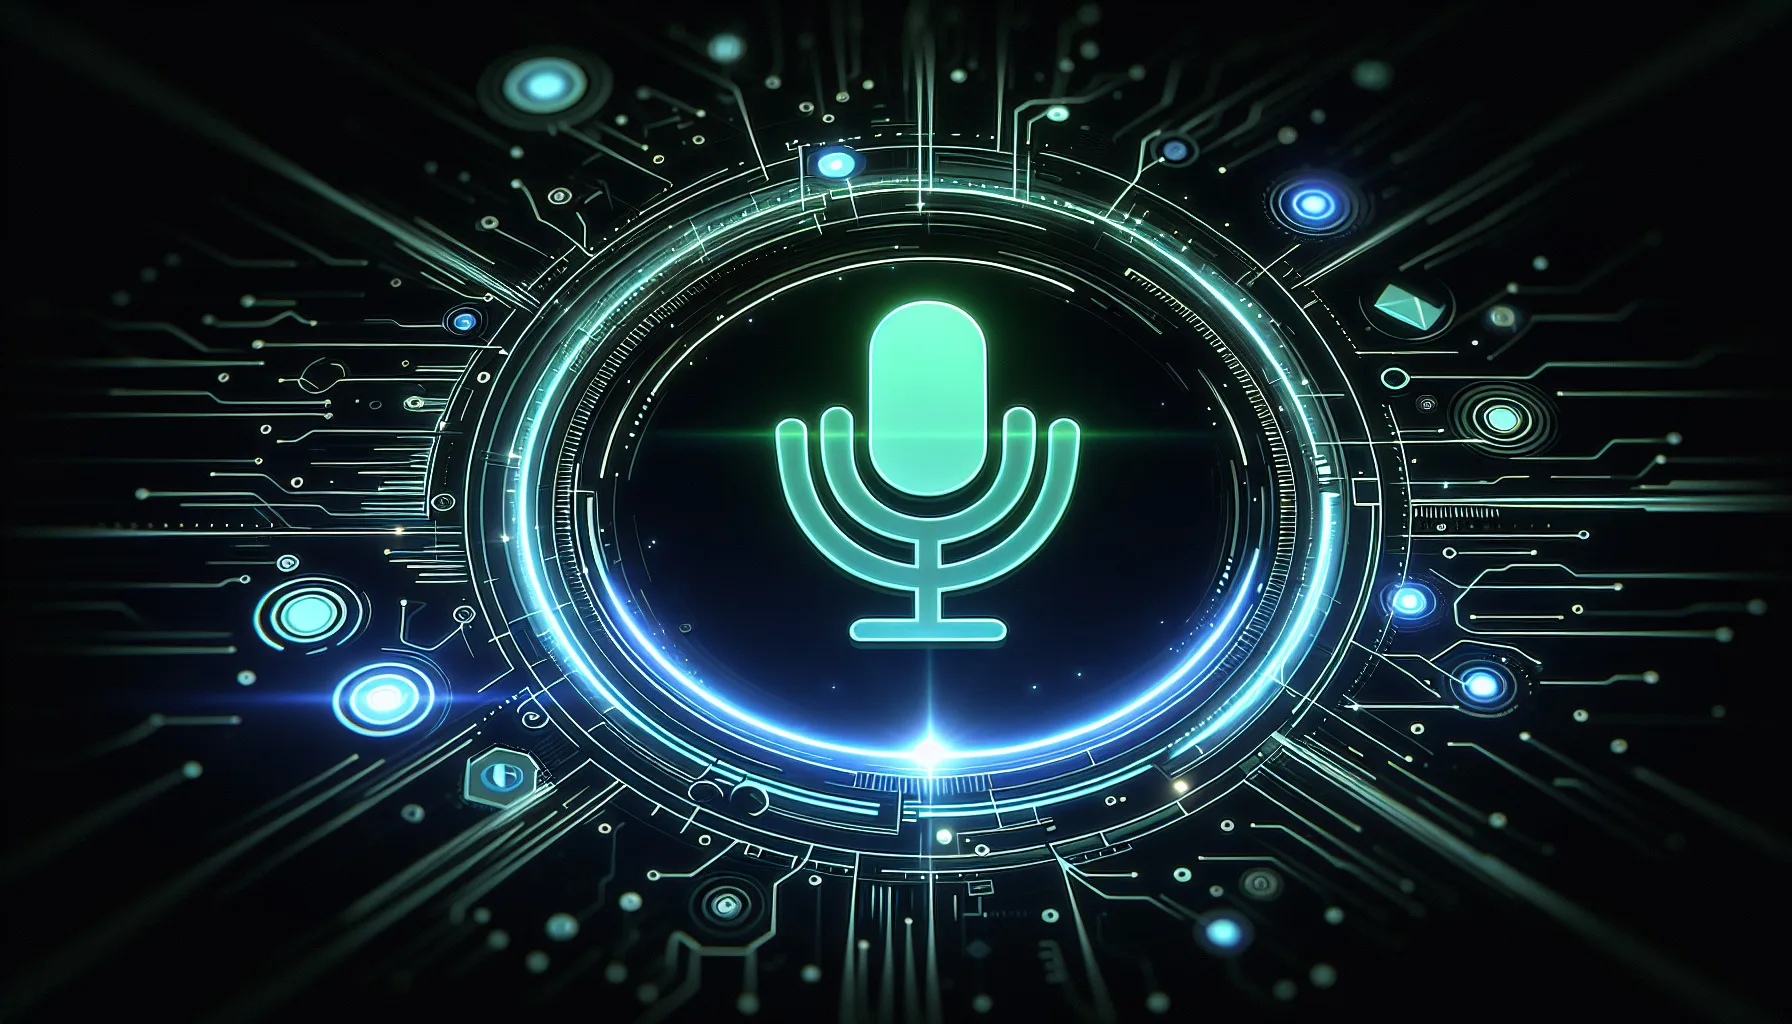 Voice search is changing SEO. Learn how to optimize your content for it.